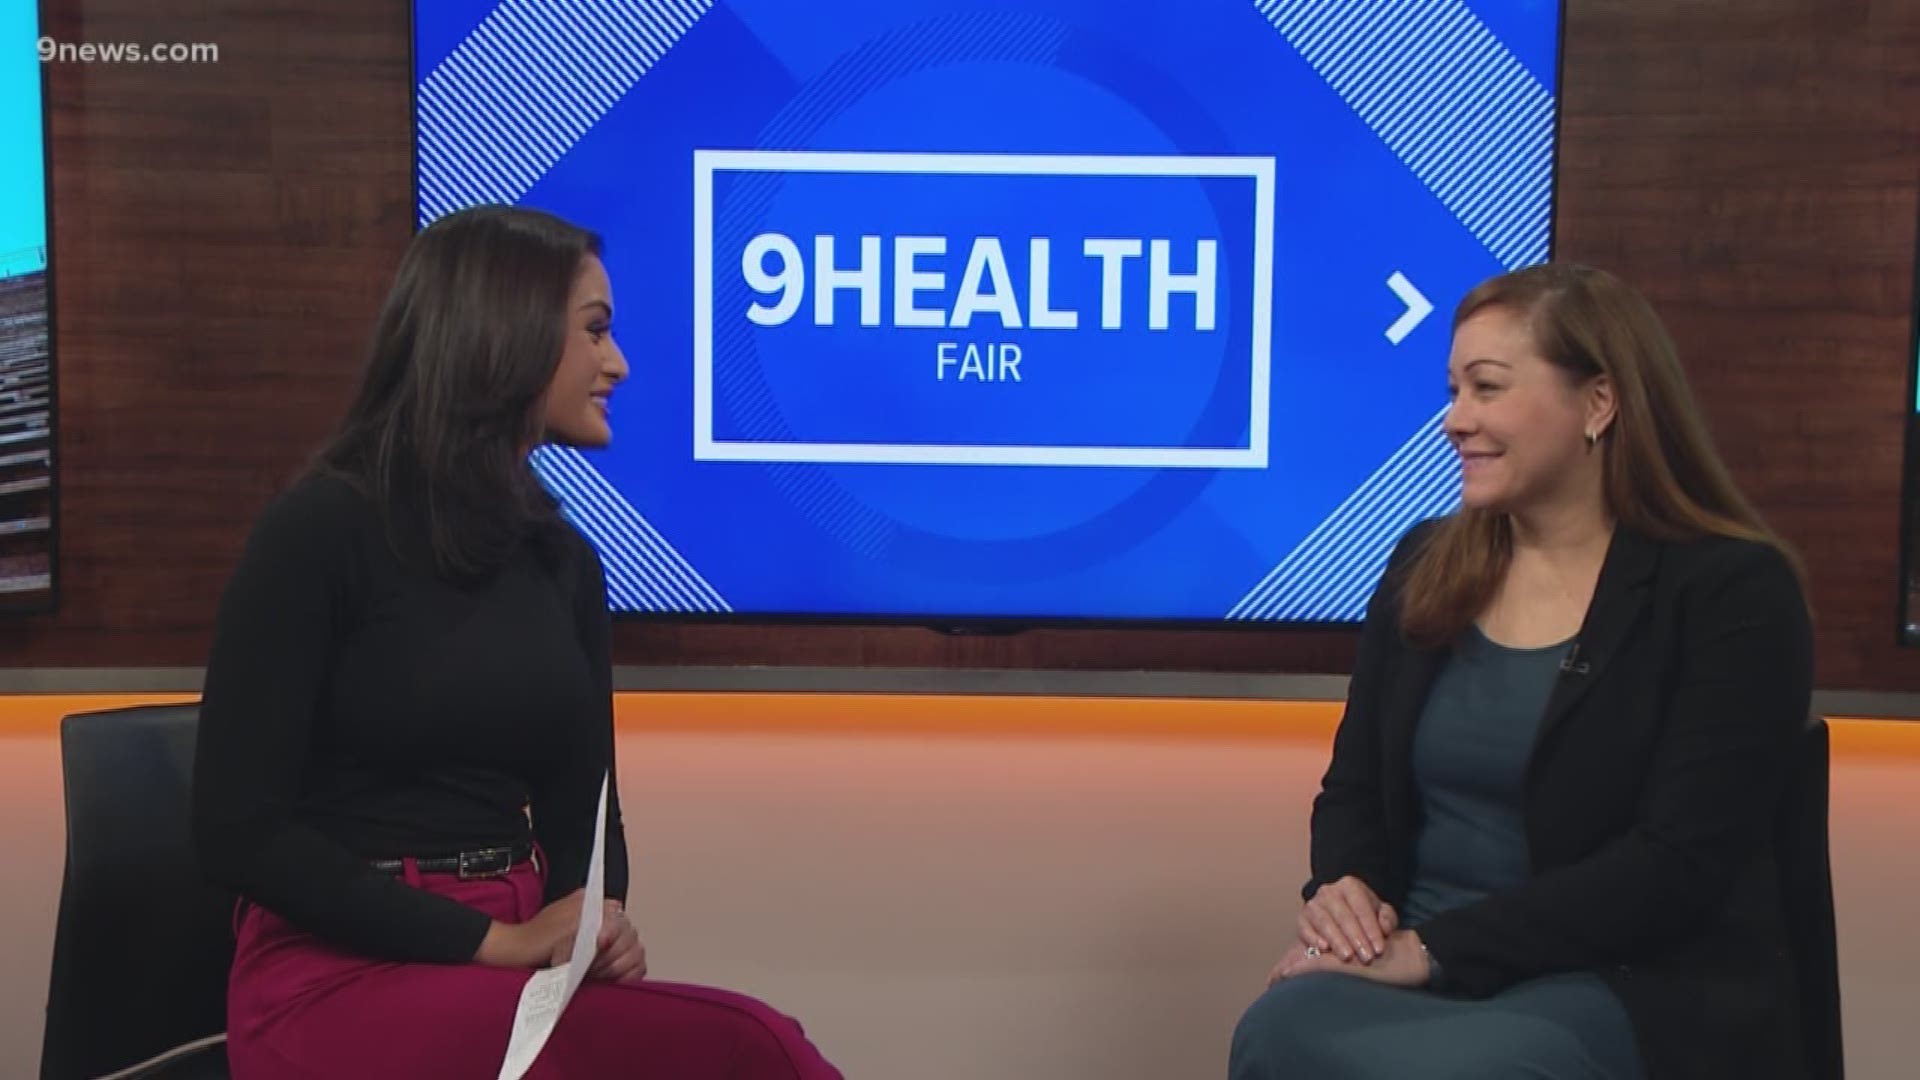 On World Mental Health Day we talked with Dr. Andi Pusavat from the University of Denver Morgridge College of Education about mental health screenings from 9Health.